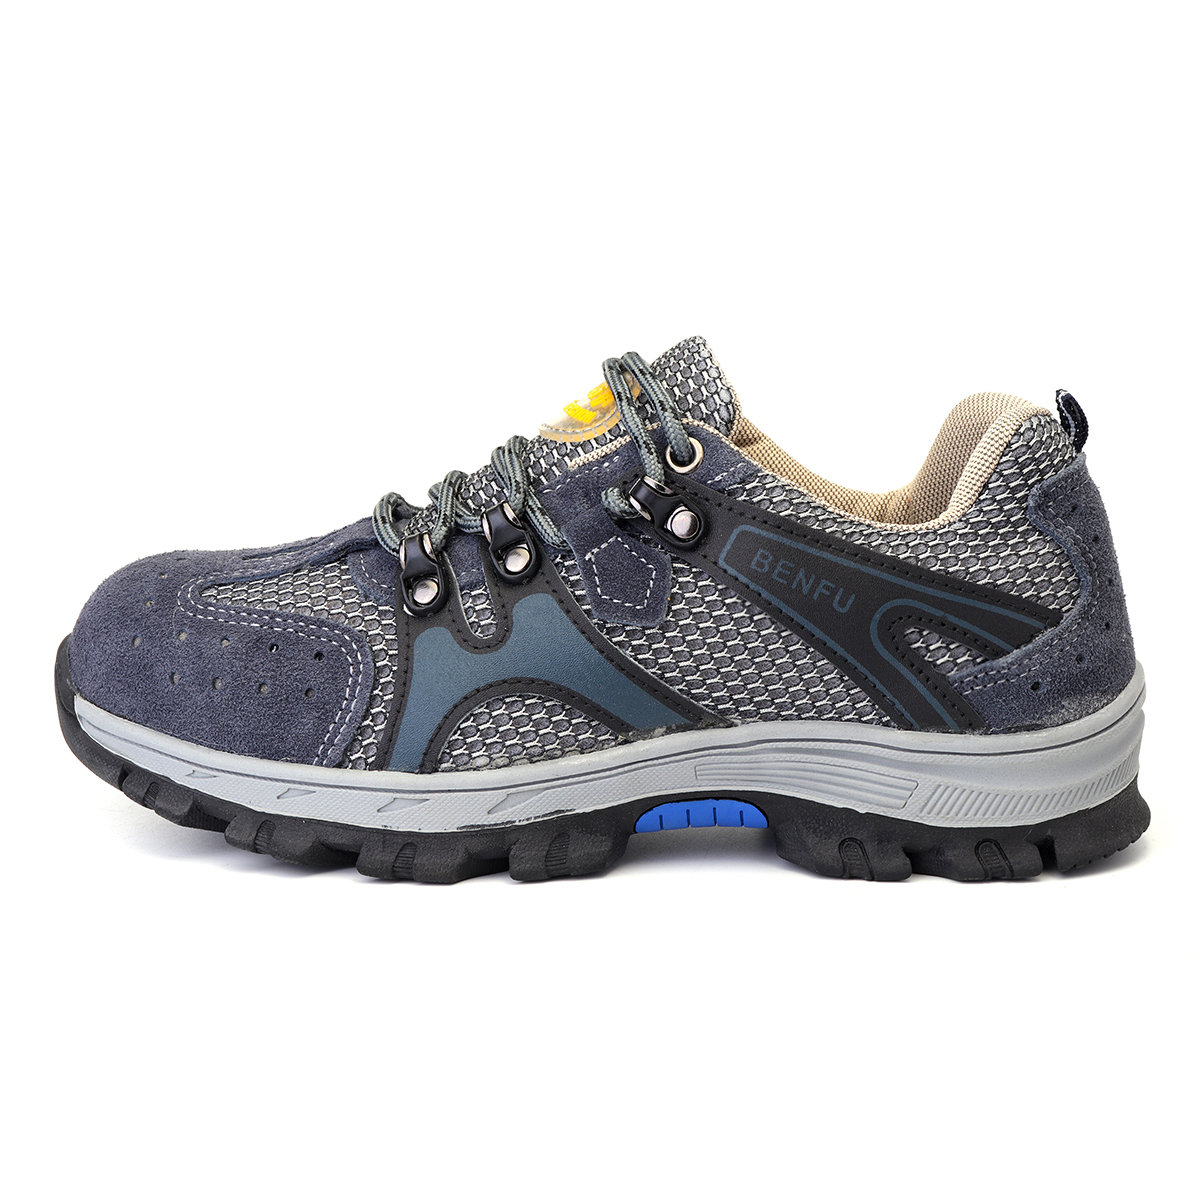 Mens-Safety-Shoes-Steel-Toe-Work-Sneakers-Slip-Resistant-Breathable-Hiking-Climbing-Shoes-1294188